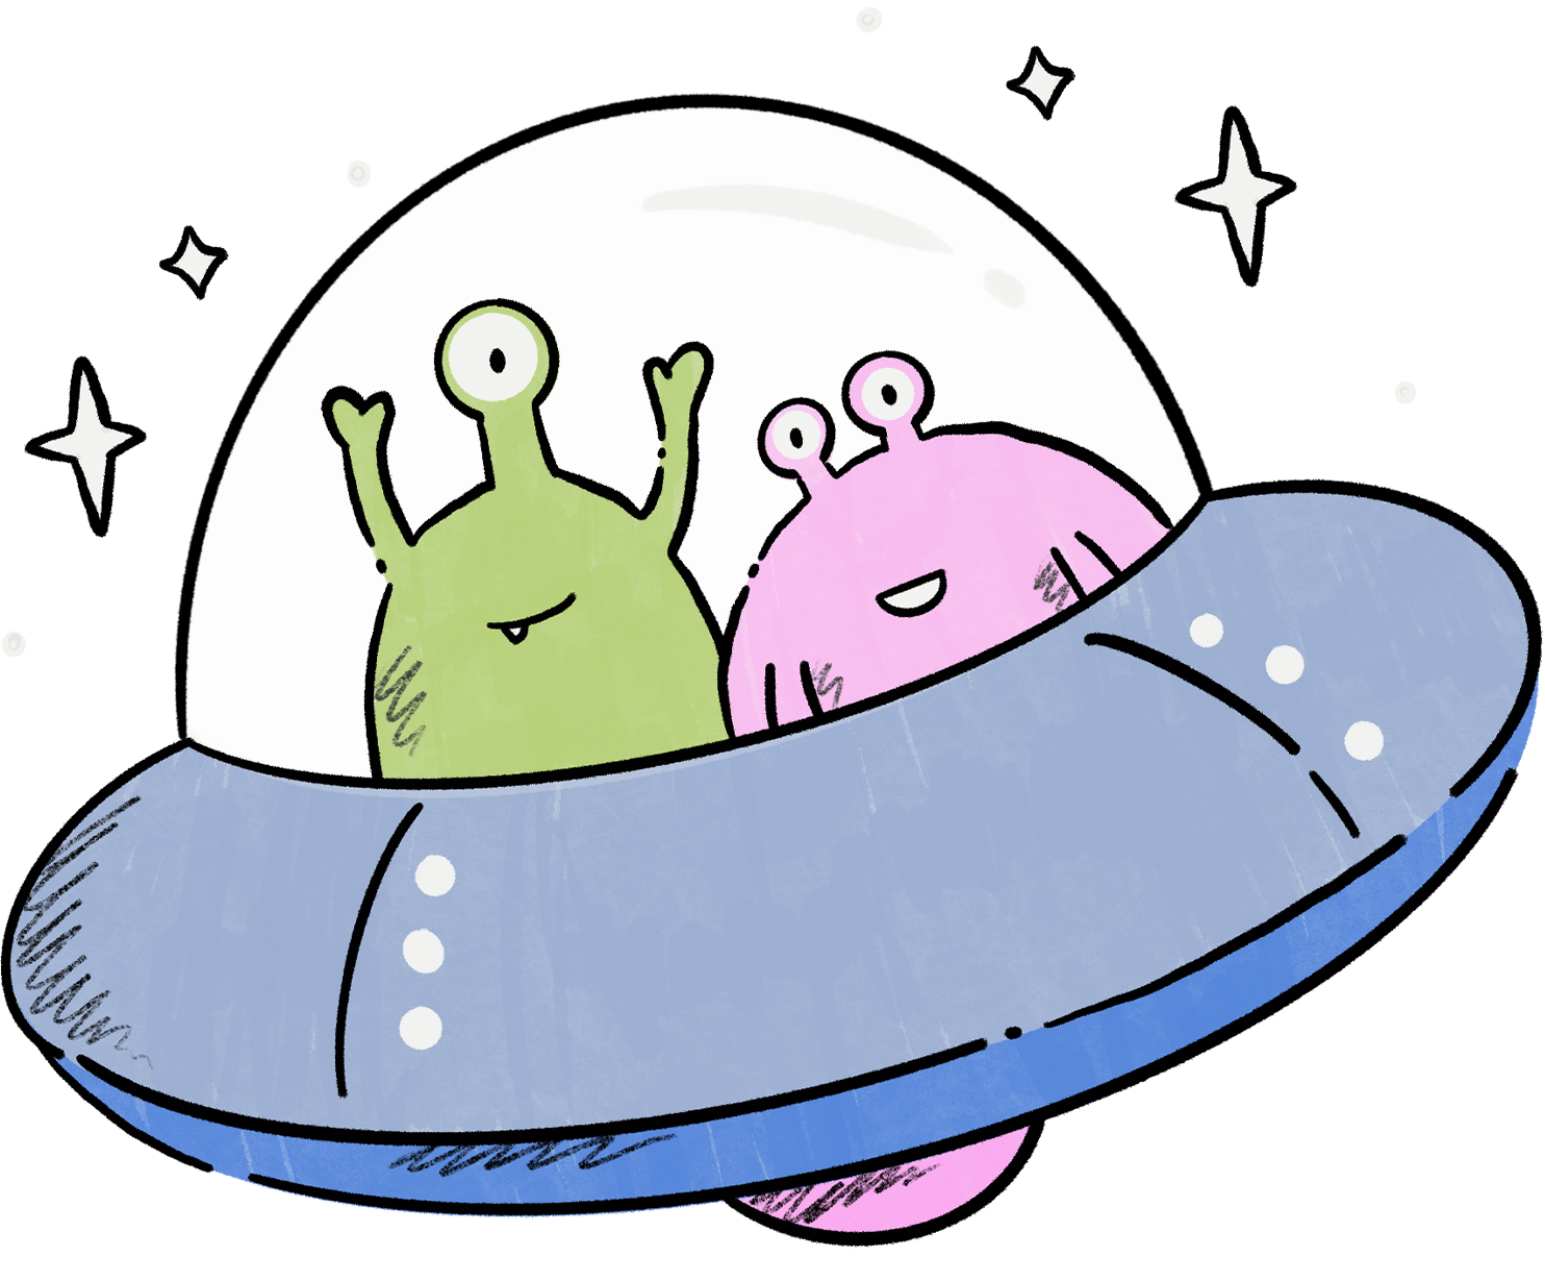 Futuristic green and pink aliens in a blue spacecraft.